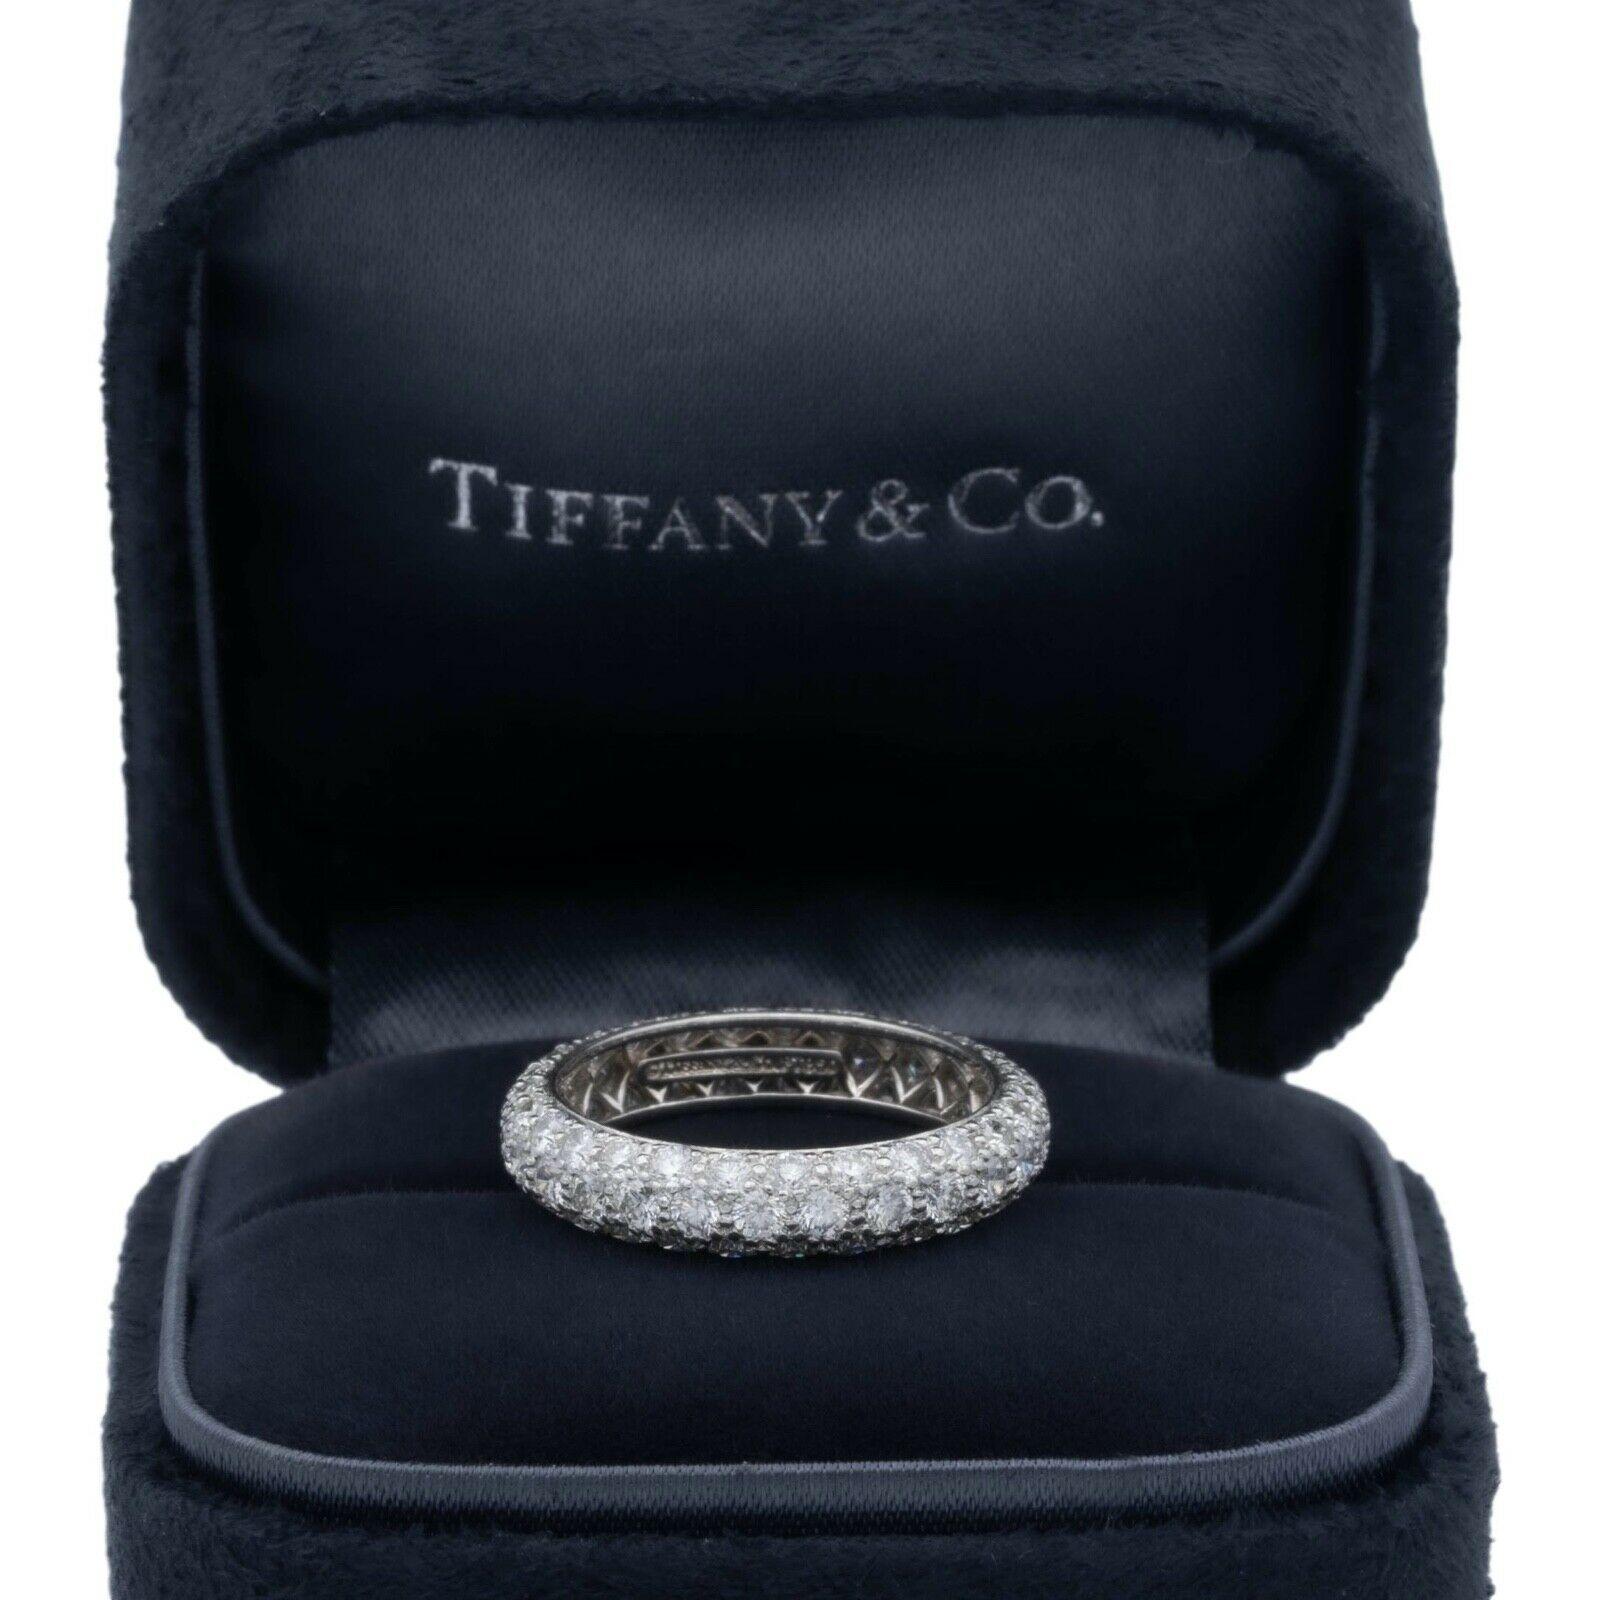 Tiffany & Co. 3 row pave band ring from the Etoile collection finely crafted in platinum with 81 round brilliant cut diamonds bead set all the way around weighing 1.51 carats total weight, E-F color , VS1-VS2 clarity. The band has a domed design